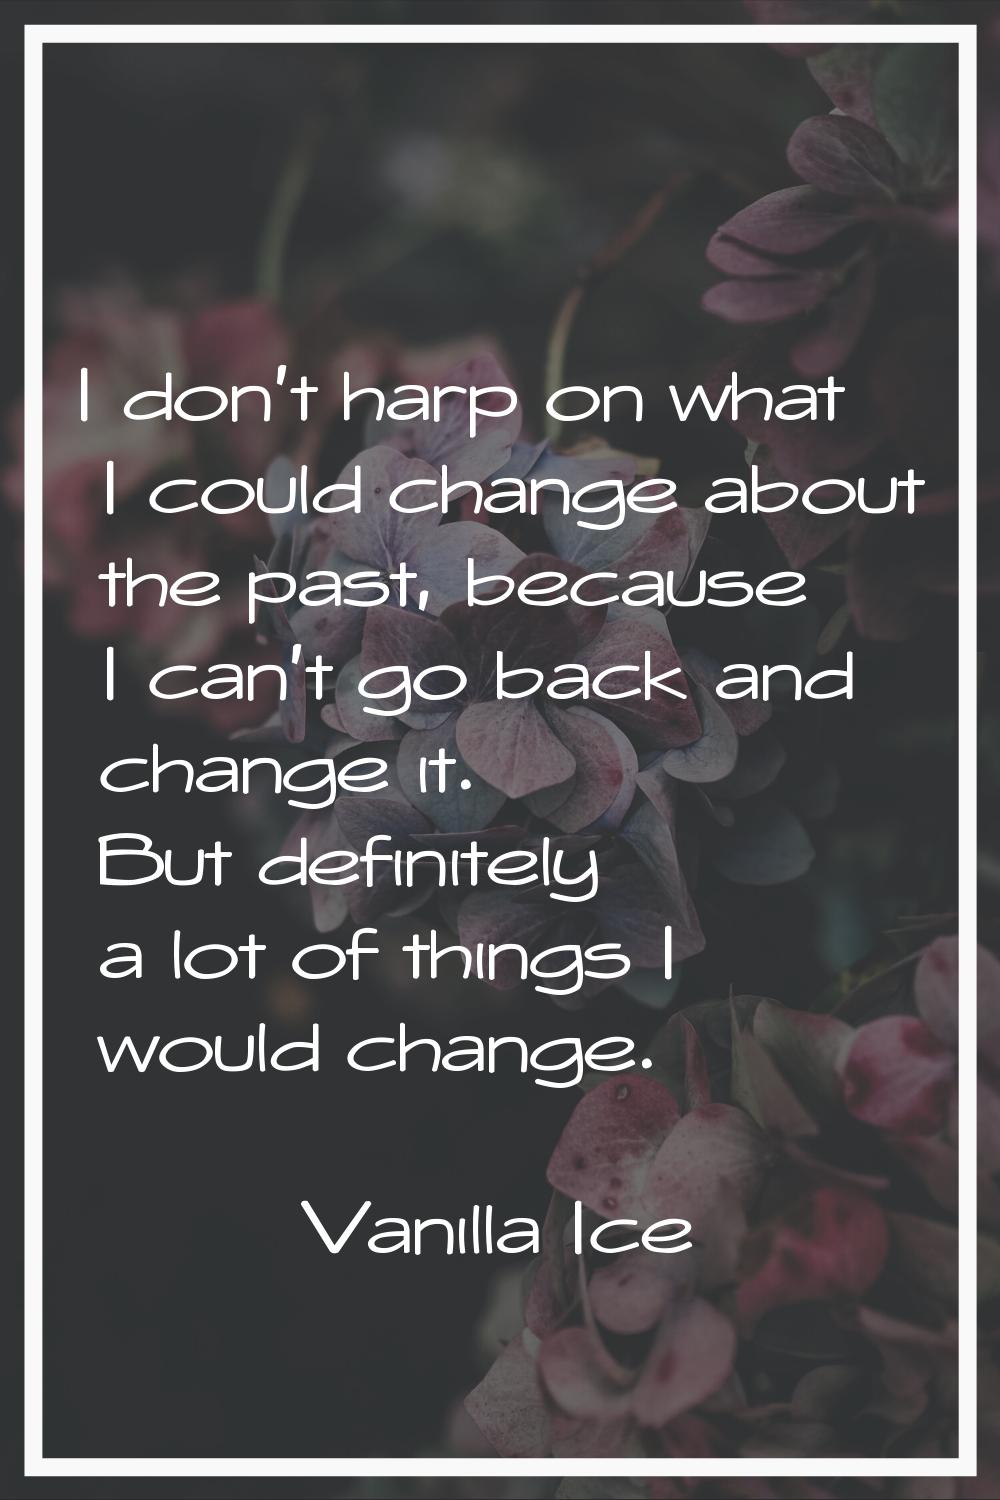 I don't harp on what I could change about the past, because I can't go back and change it. But defi